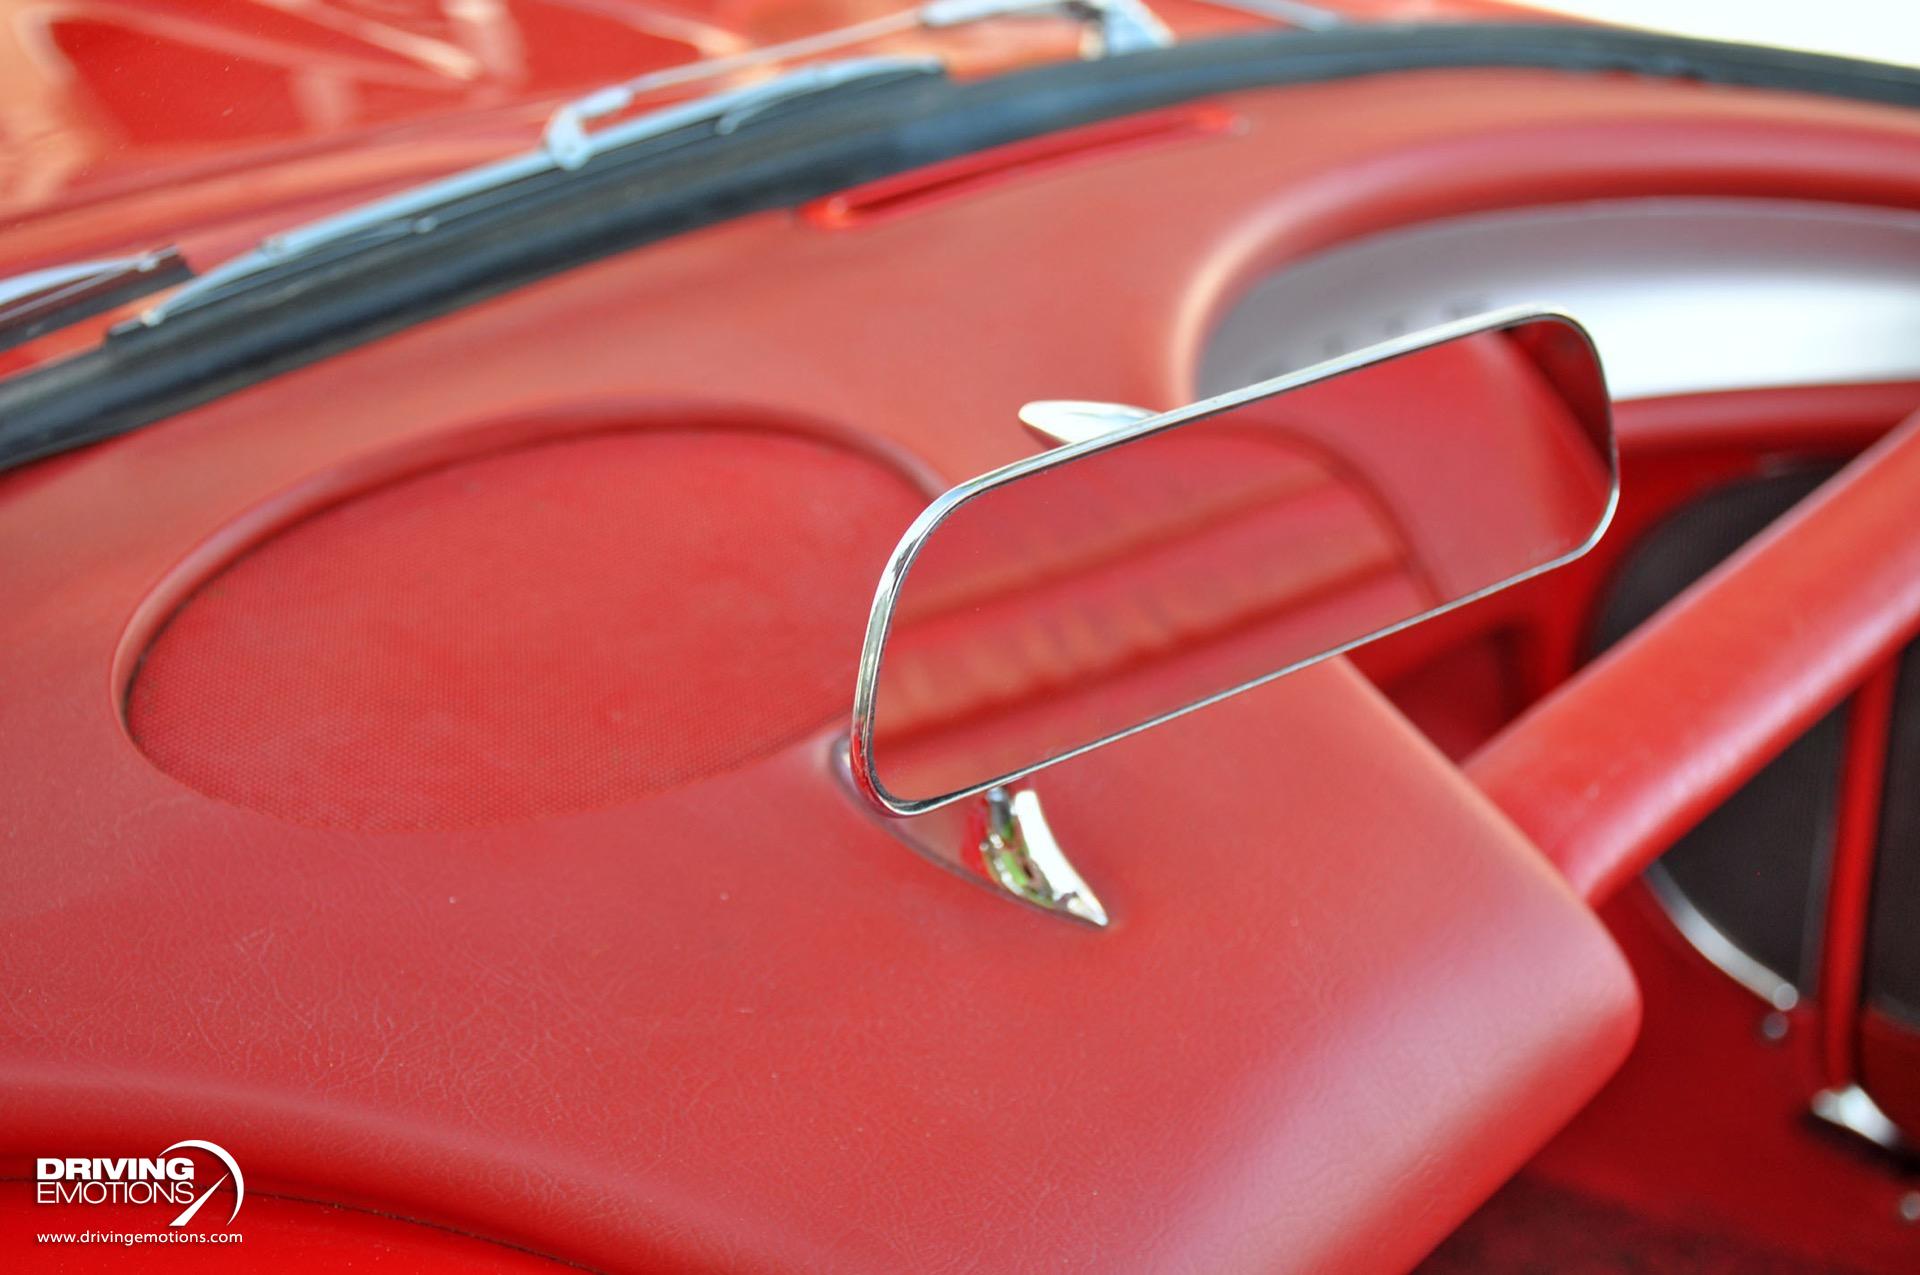 Used 1959 Chevrolet Corvette Convertible POWER GLIDE AUTO! RED/RED! | Lake Park, FL